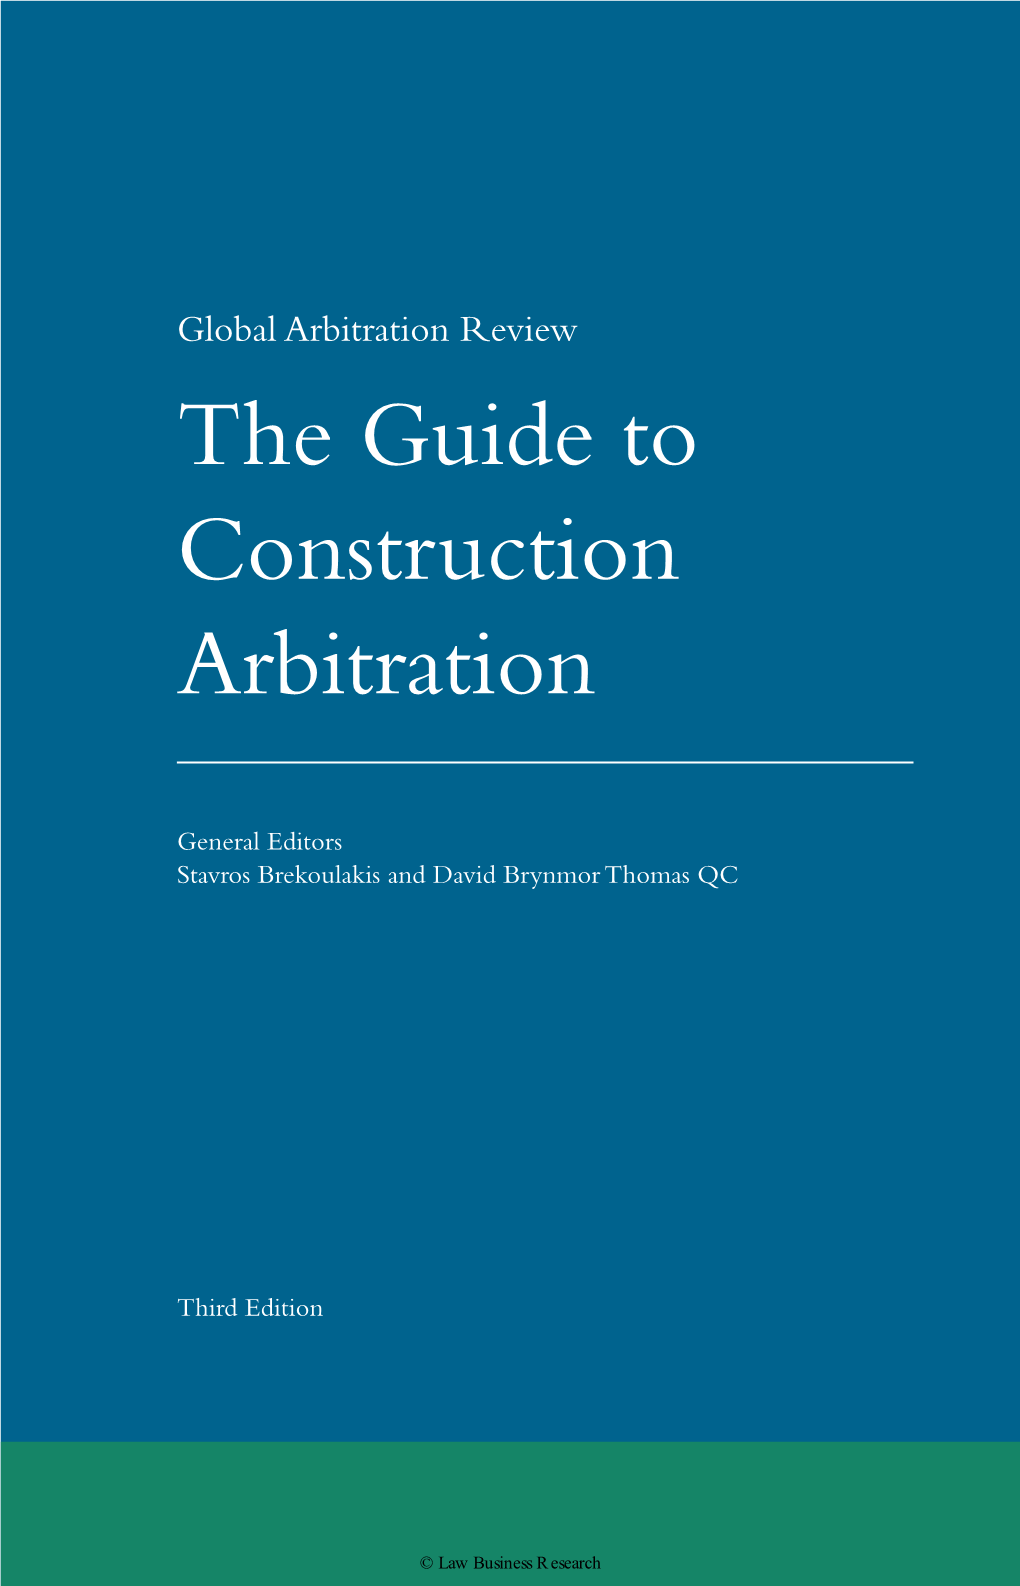 The Guide to Construction Arbitration